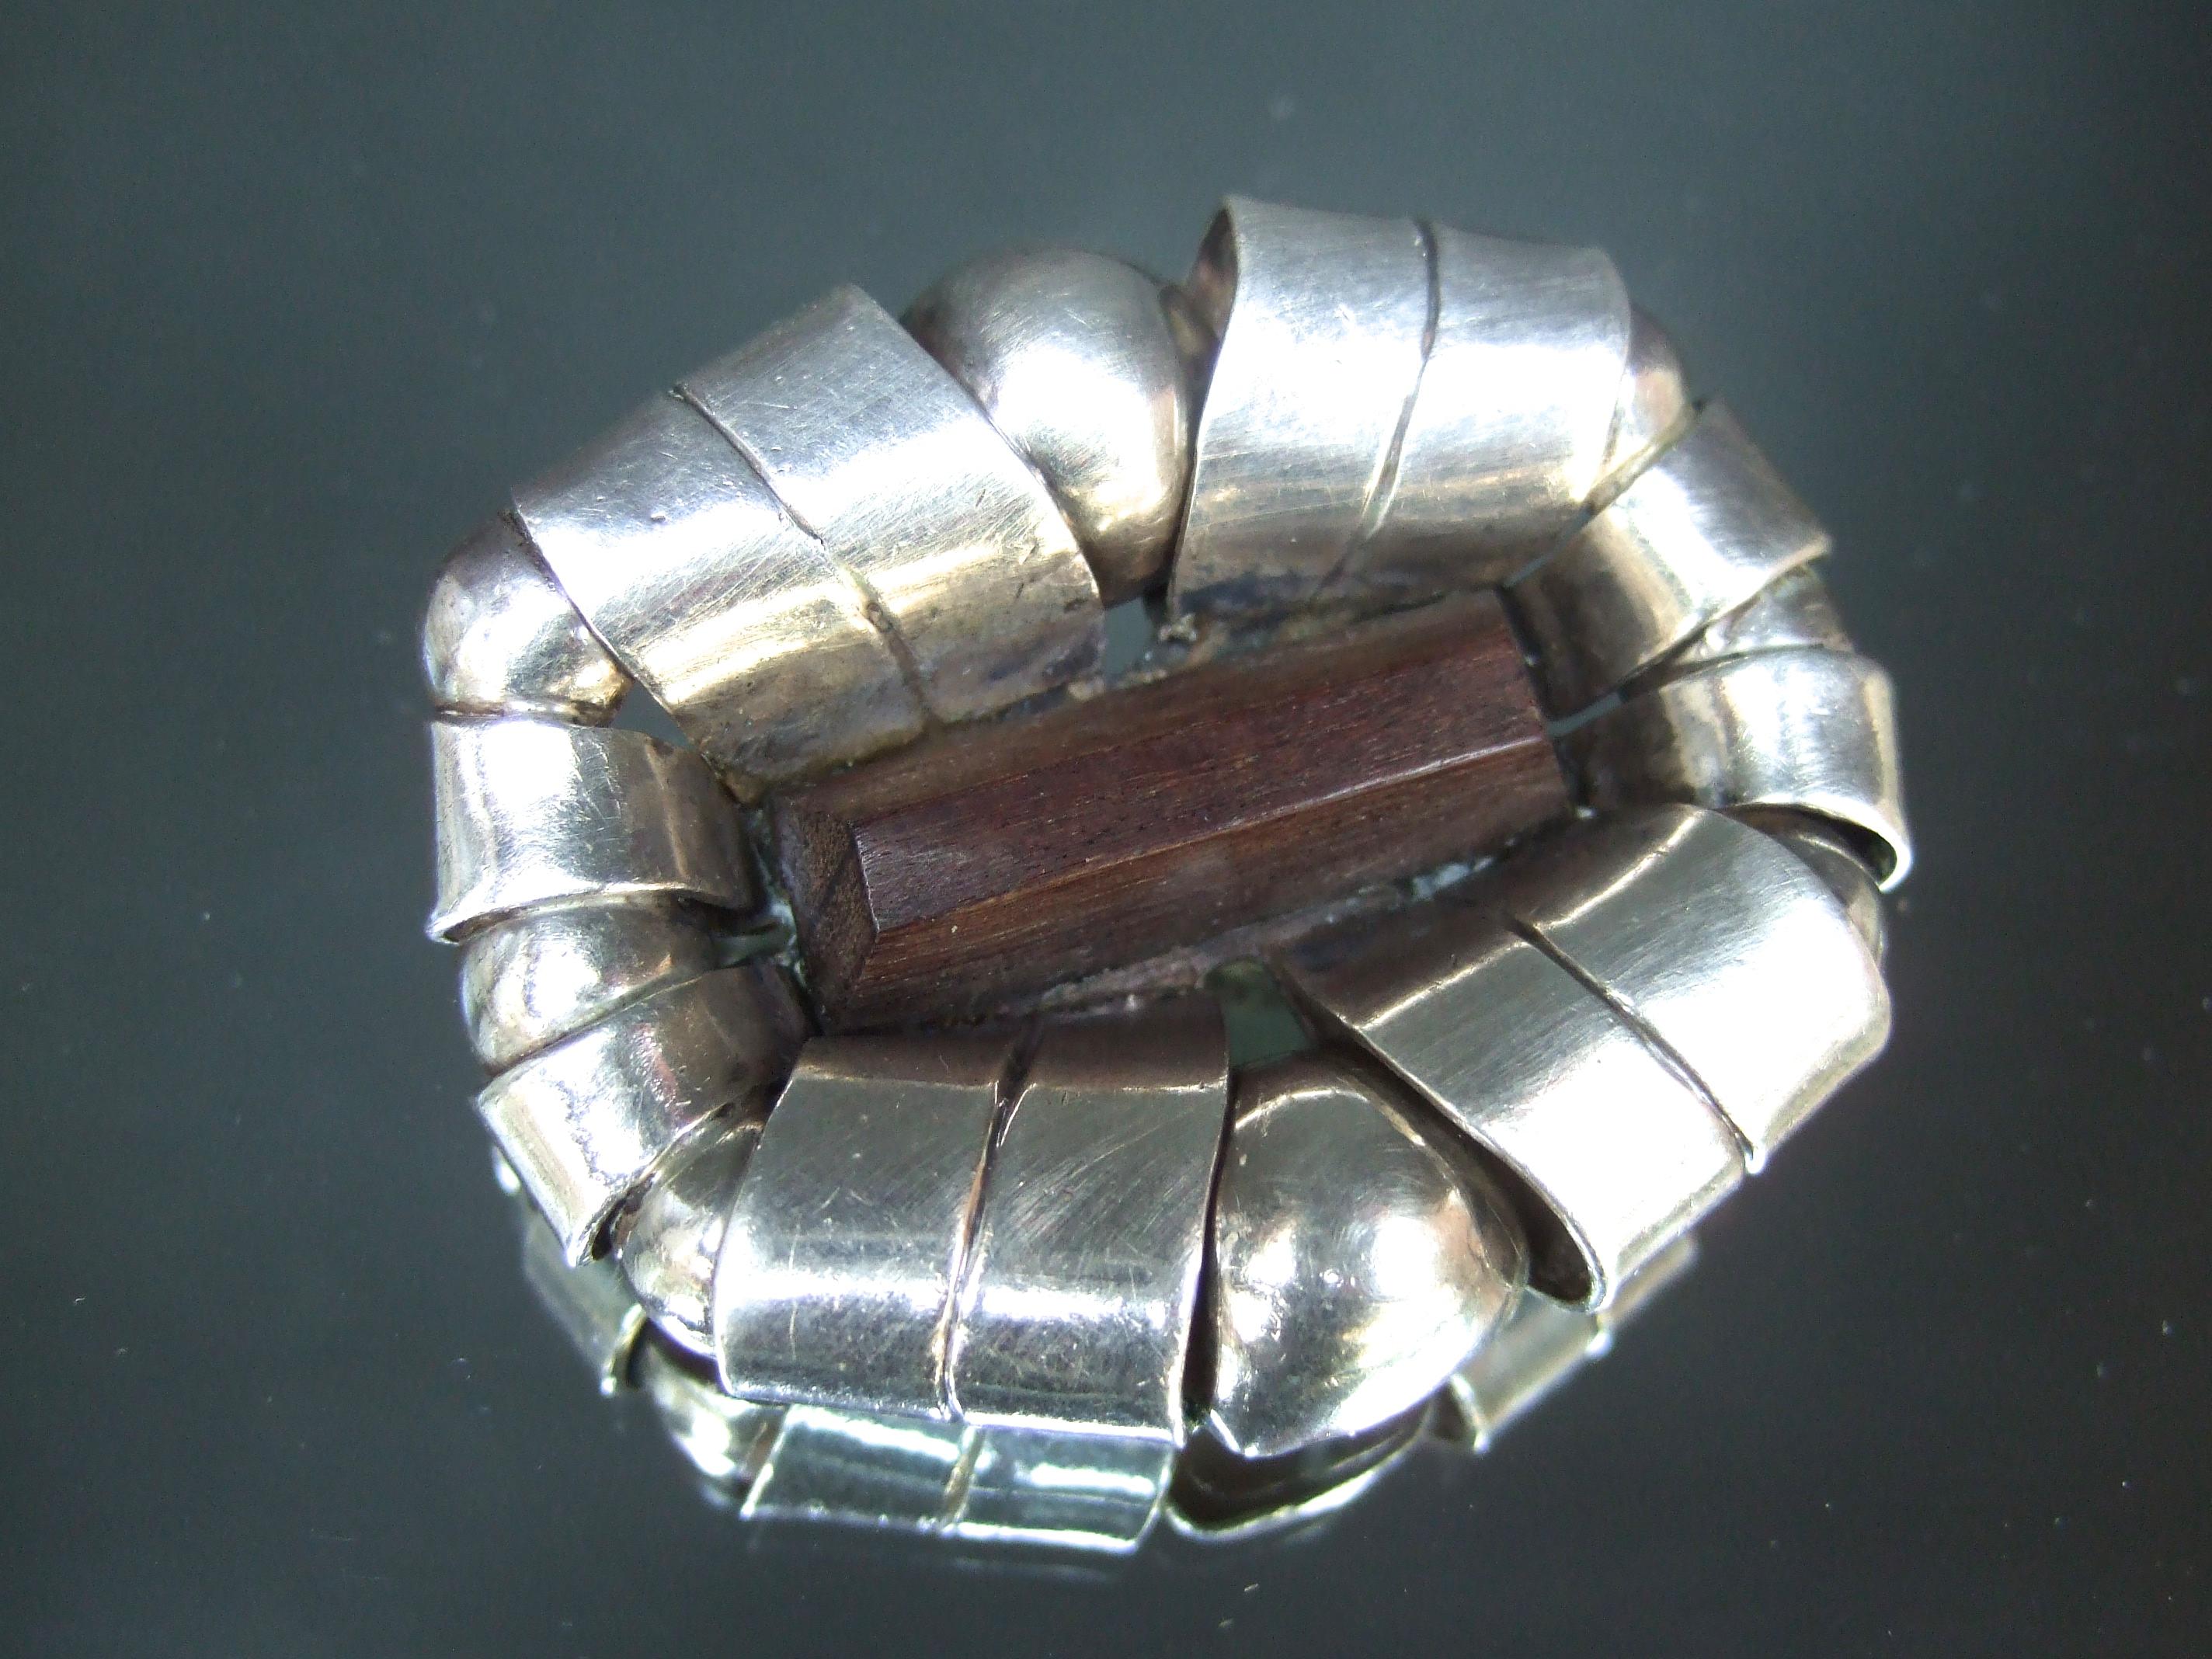 William Spratling Rare early sterling silver wood design artisan brooch c 1940
The unique artisan brooch is designed with coiled bands of sterling silver 
The center is adorned with an elongated rectangular shaped carved
ebony wood tile

The